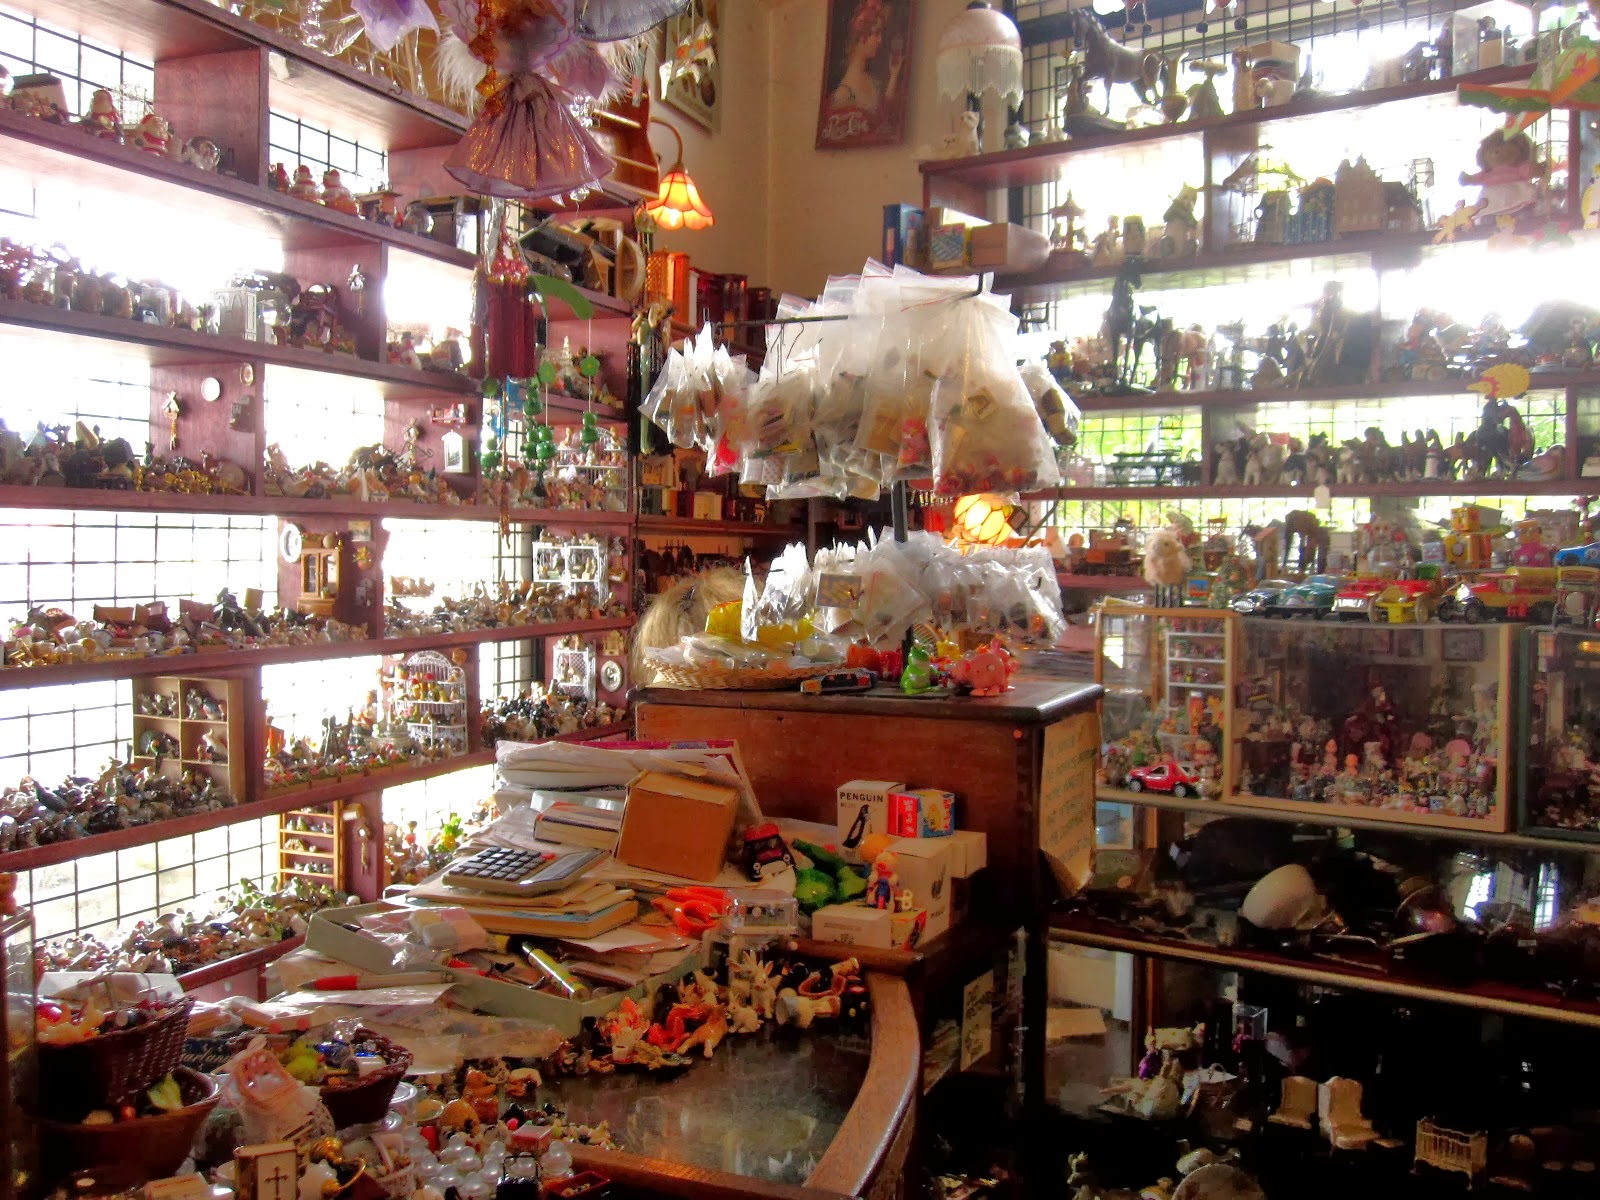 Interior view of The Old Tythe Barn dolls house shop at Blackheath